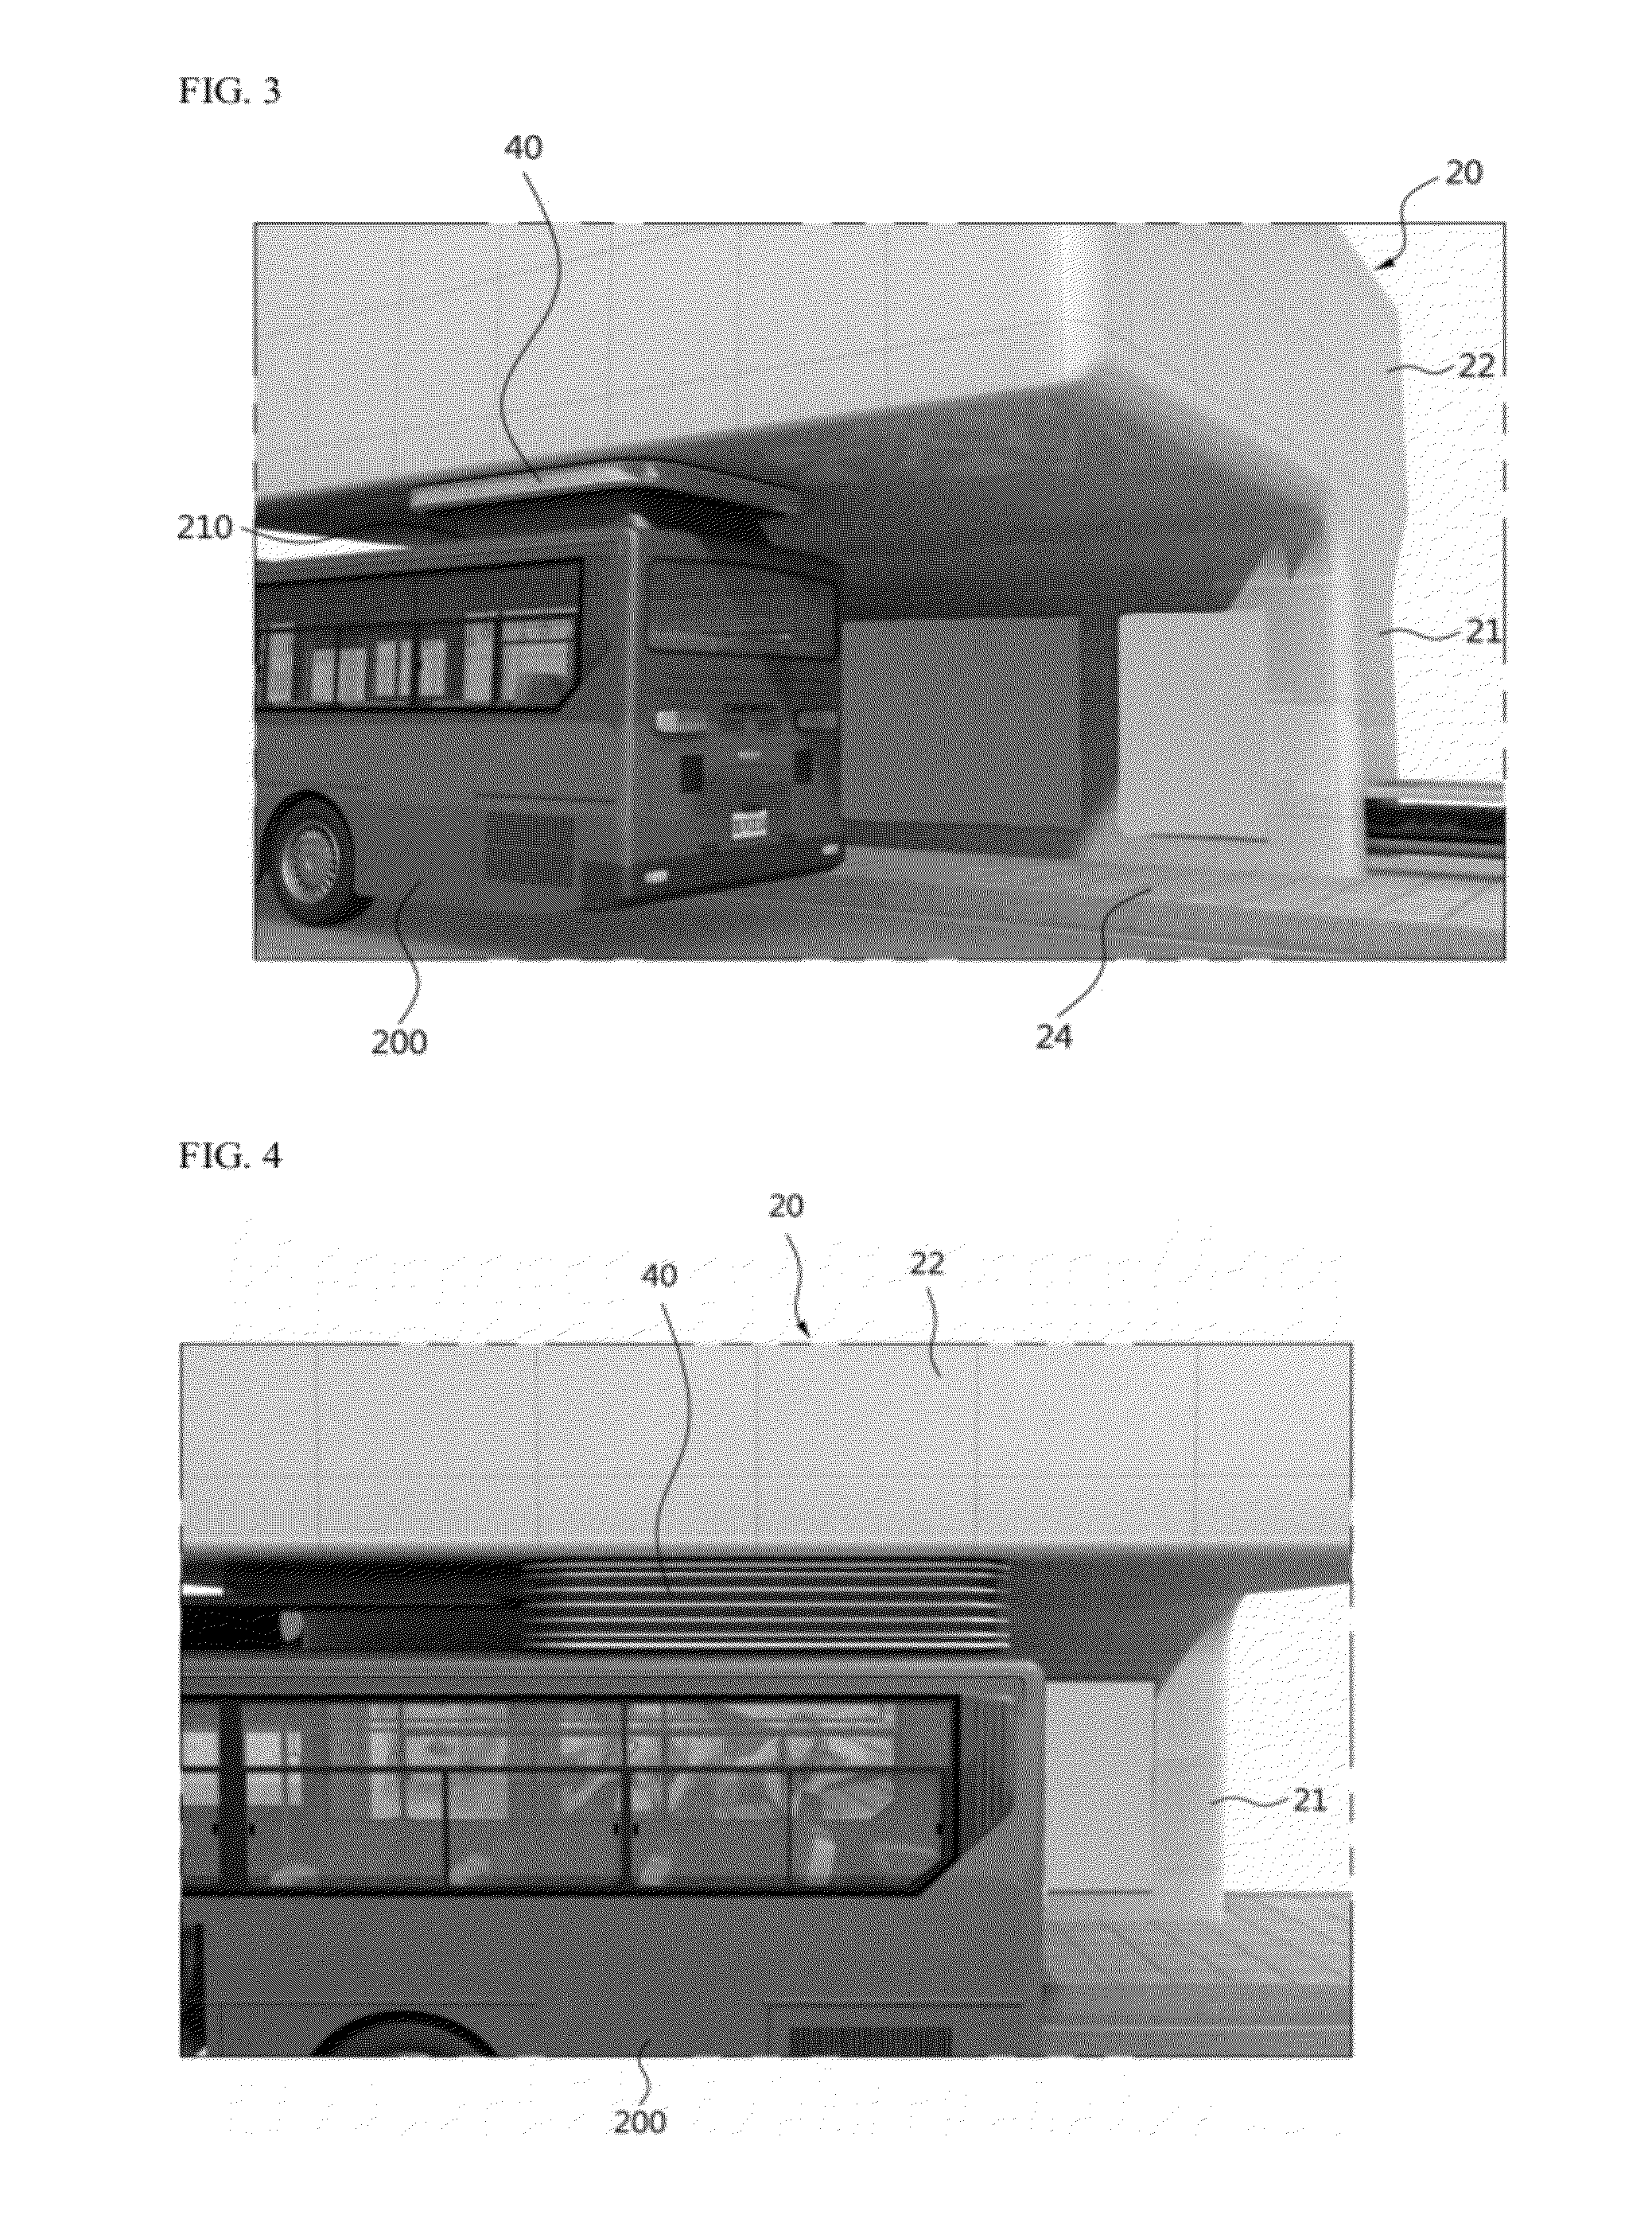 Battery exchanging method for electric vehicle